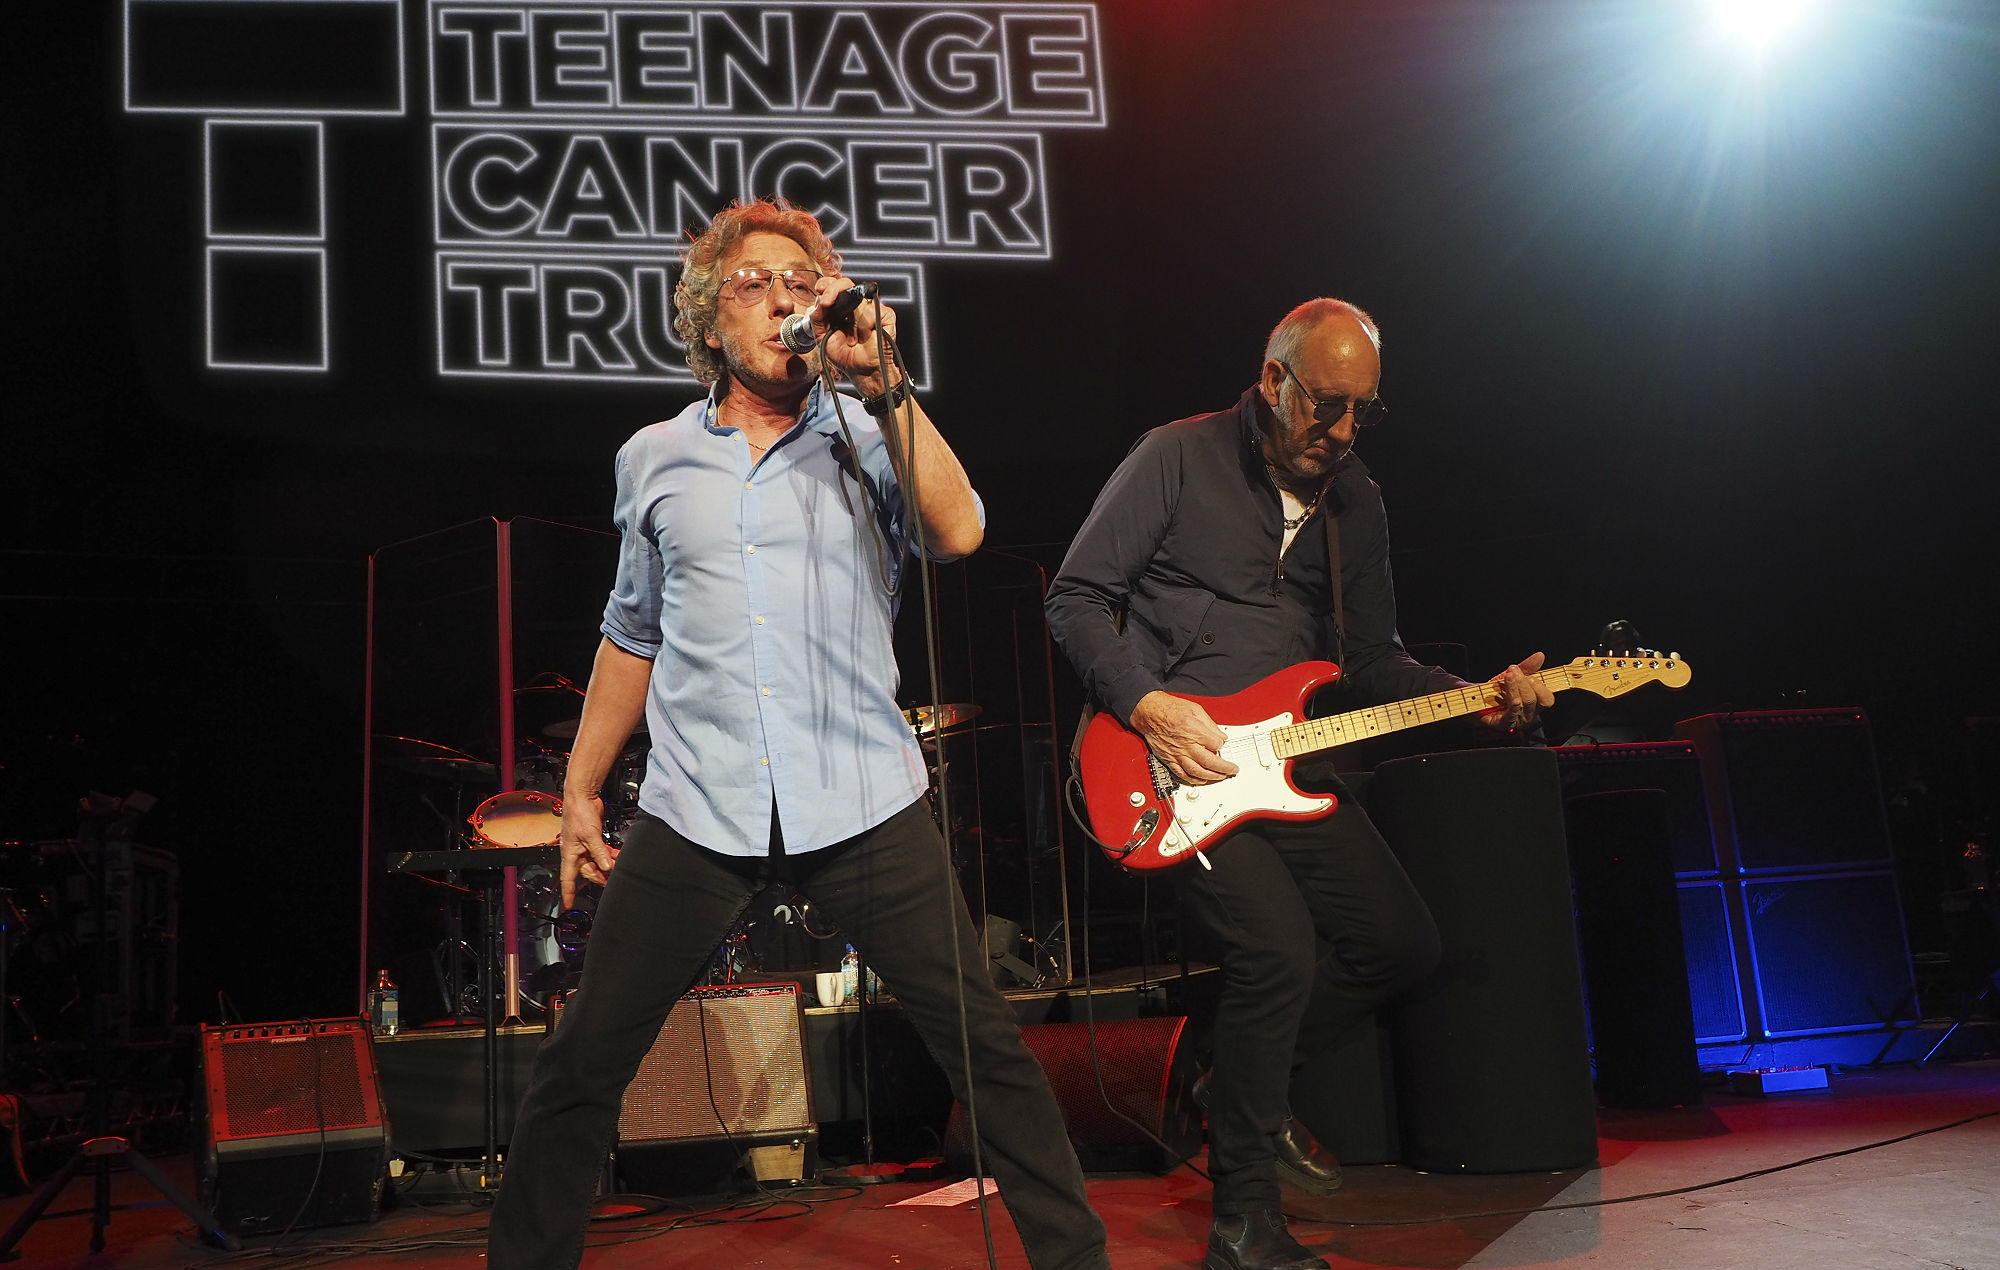 Roger Daltrey tells us about plans to stream unseen TCT gigs from The Cure, Muse, Pulp and more